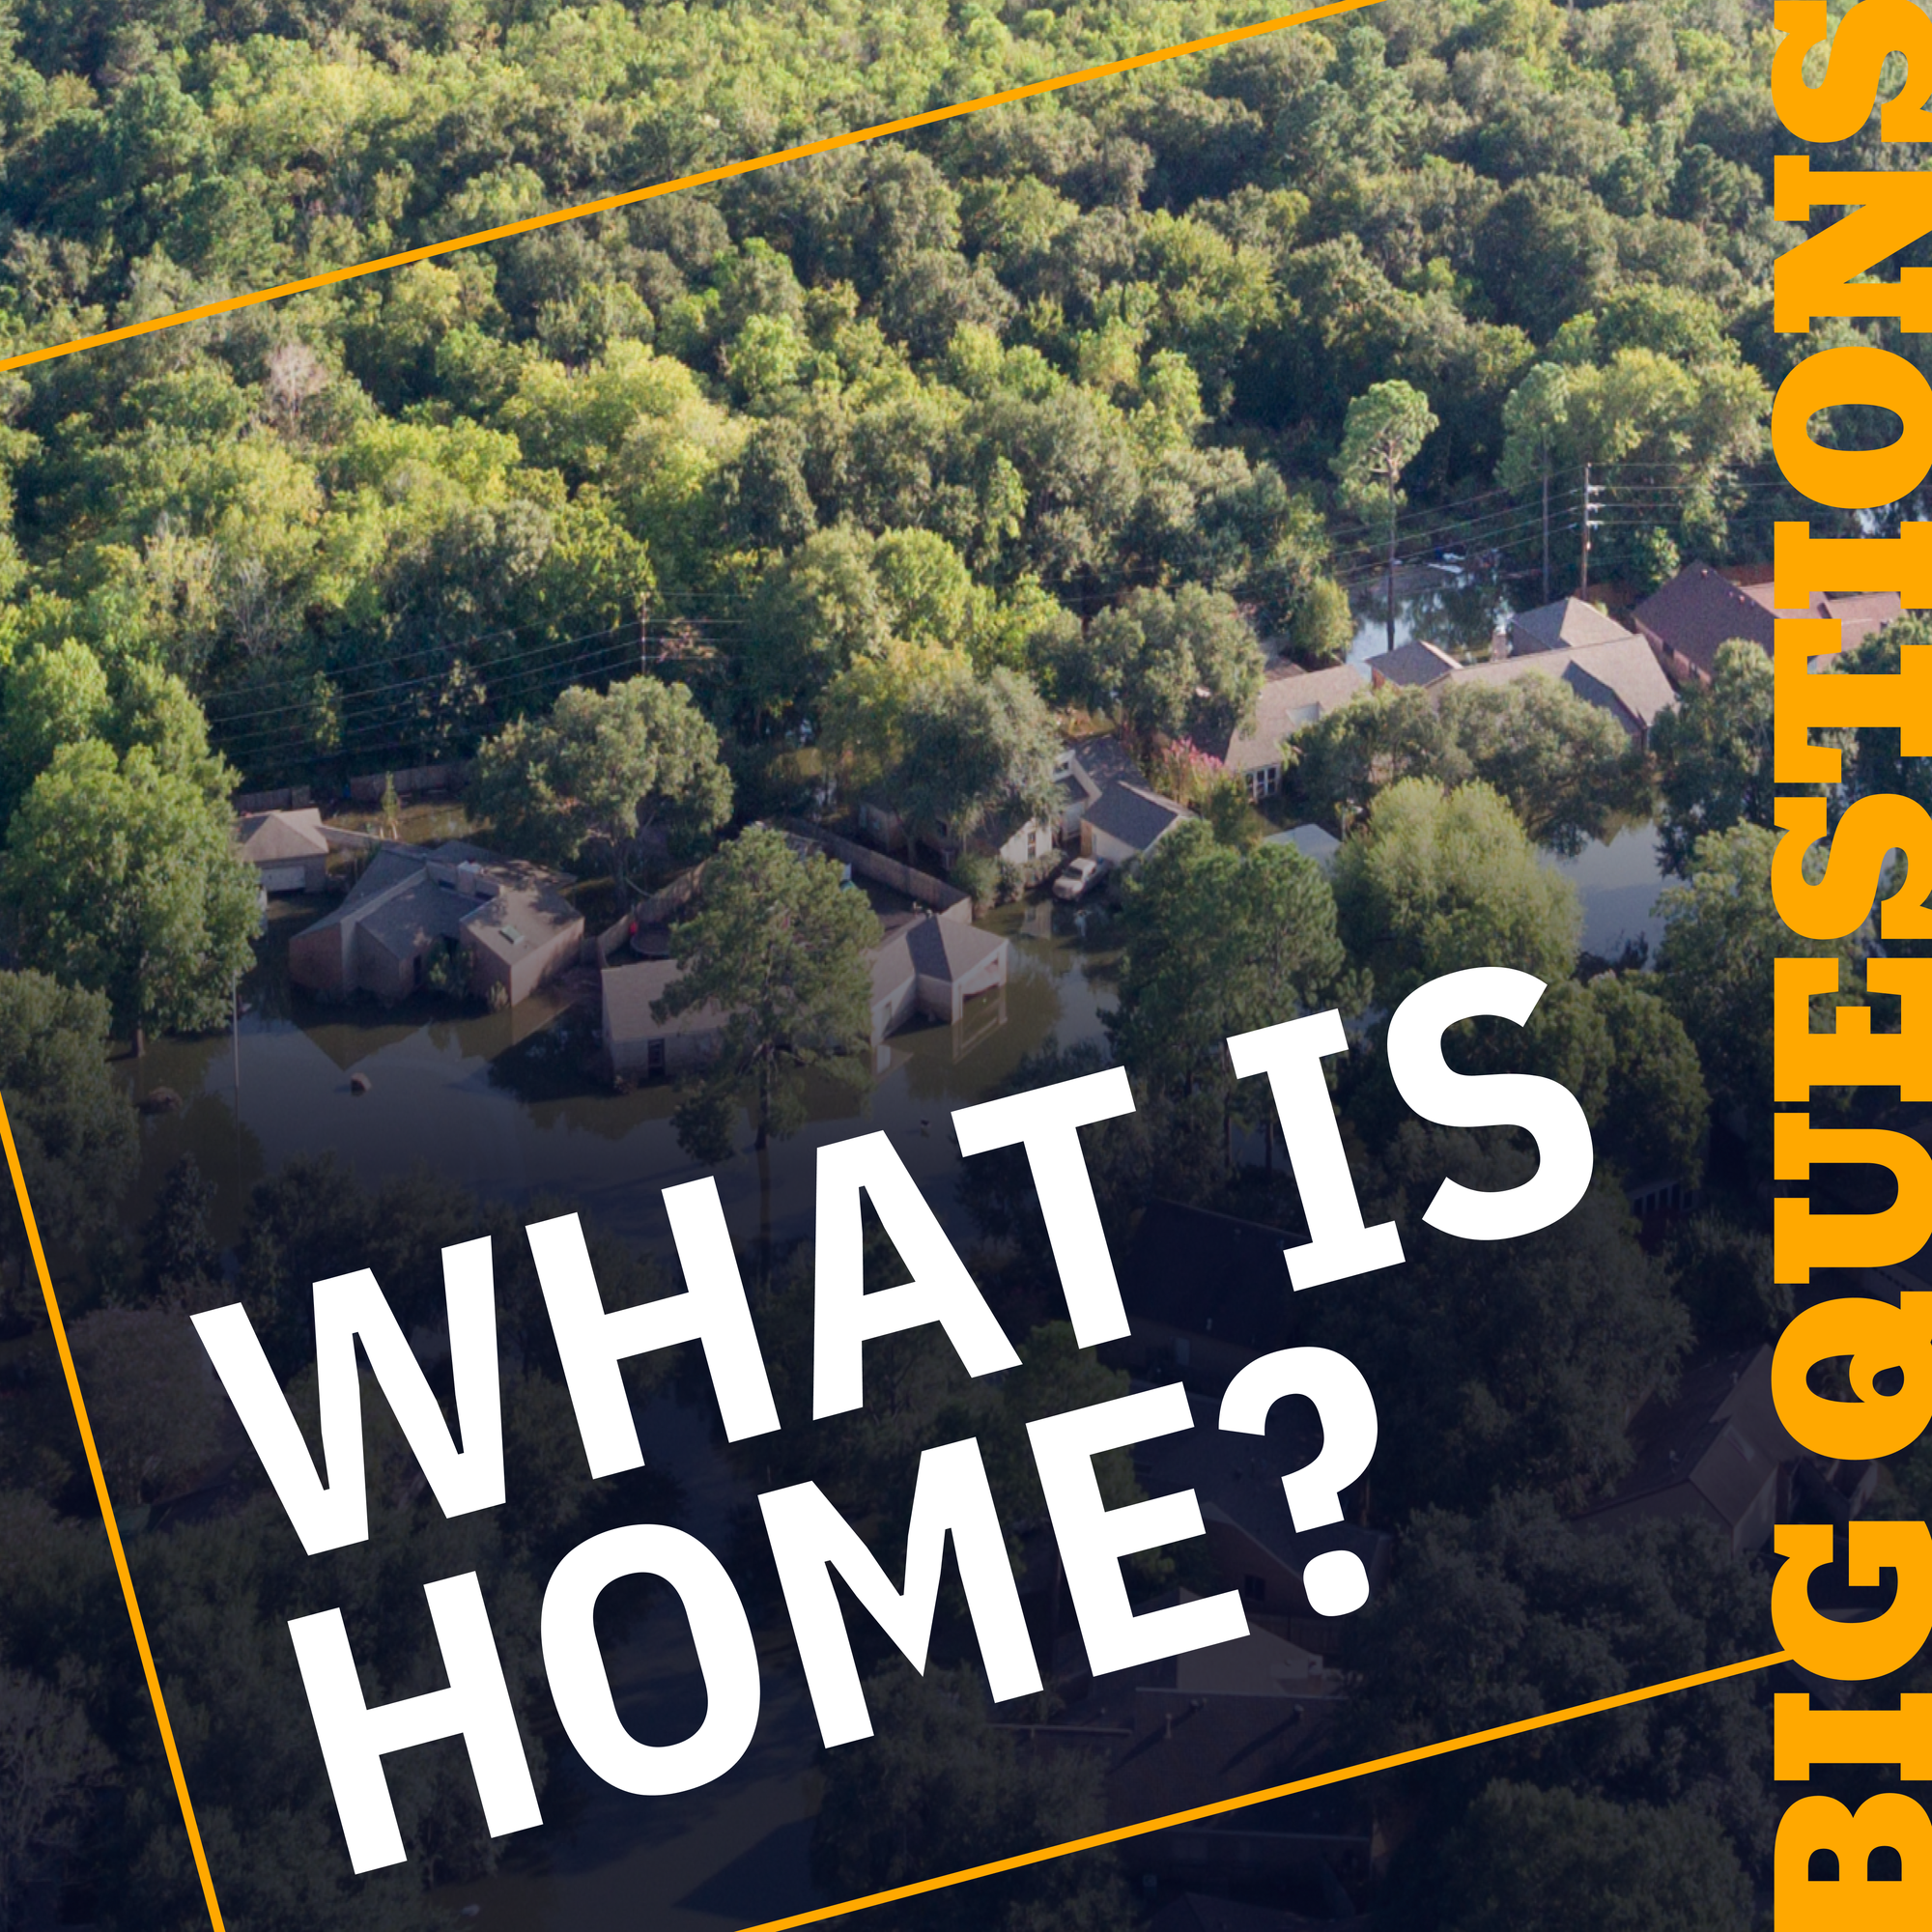 Big Questions course: What is Home?